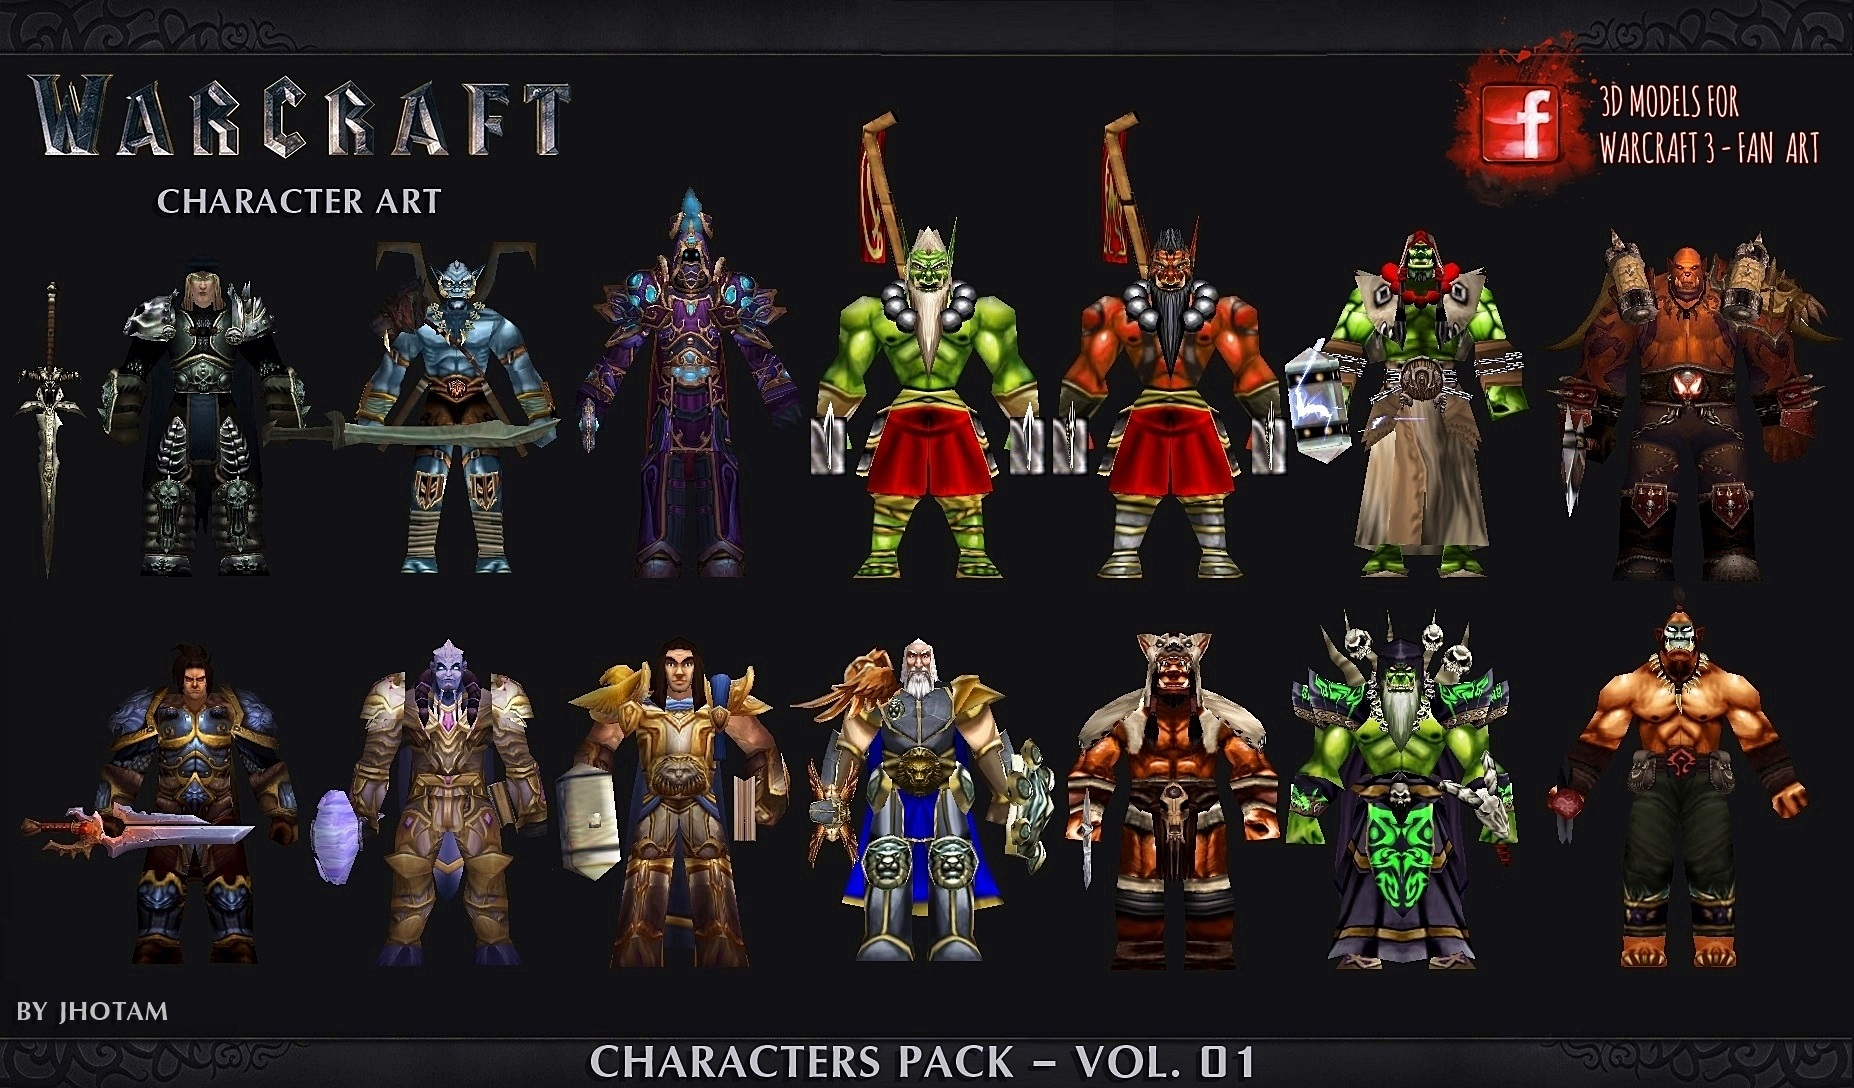 WC3_CHARACTER PACK_VOL_01